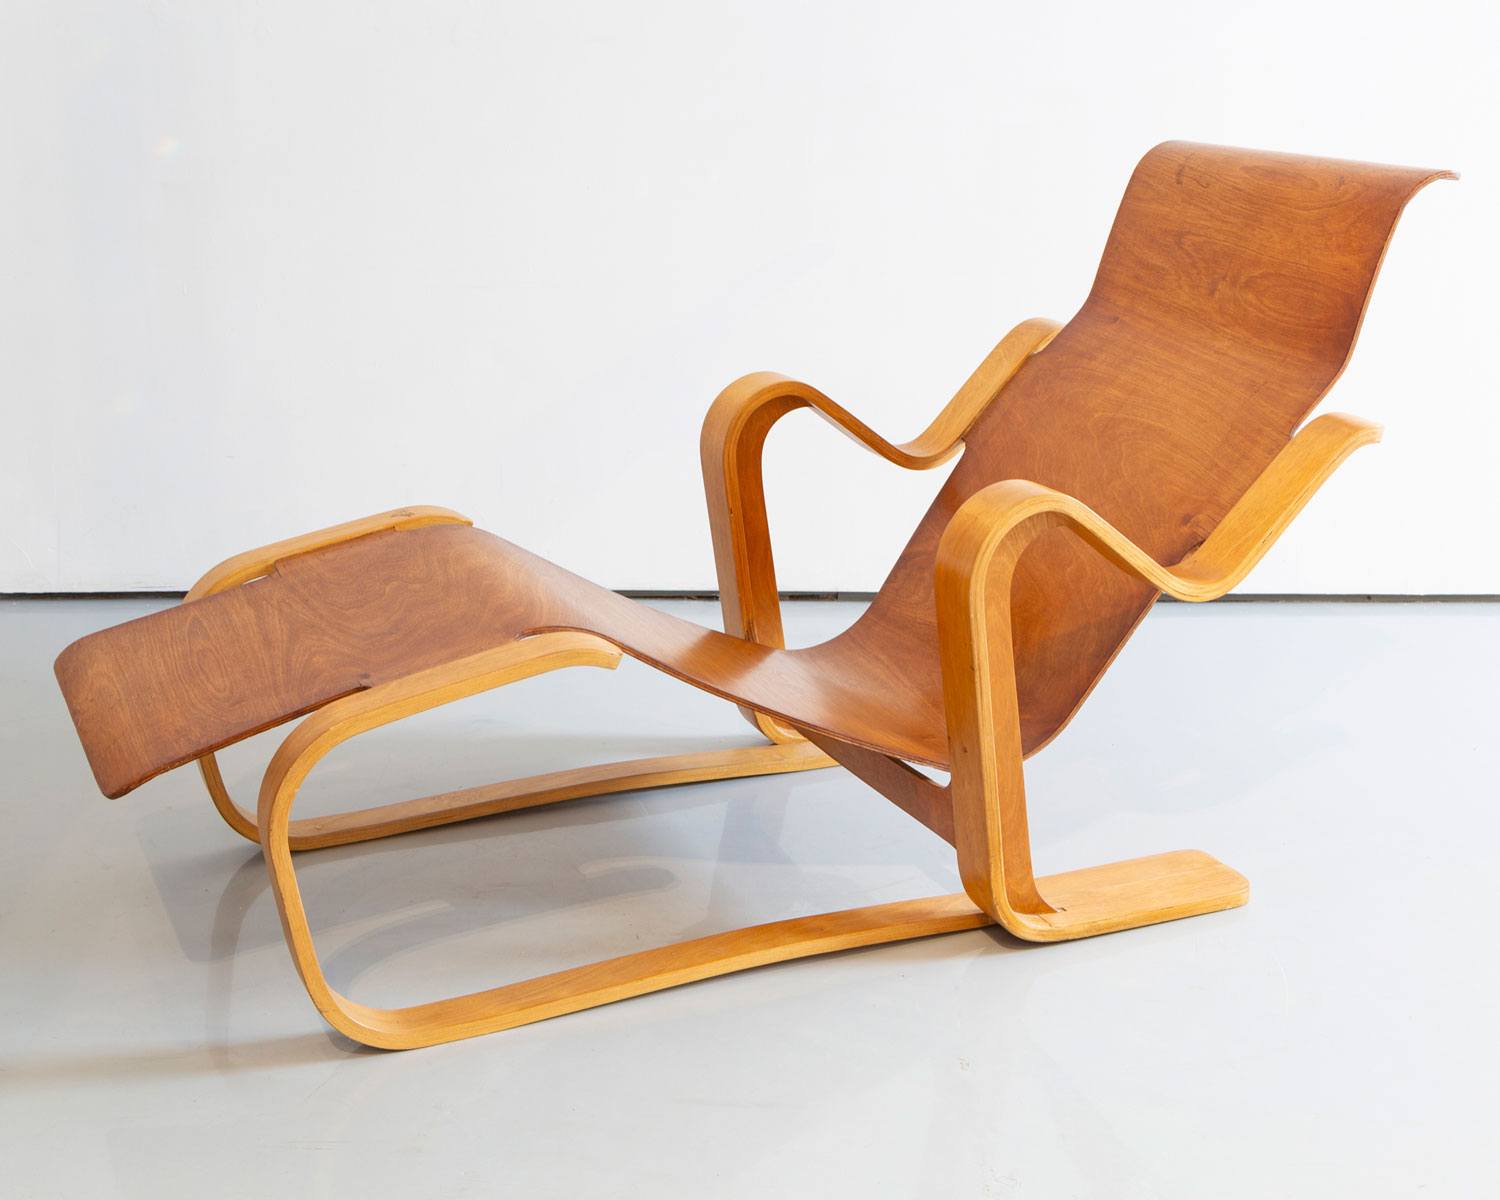 A long chair designed by Marcel Breuer.